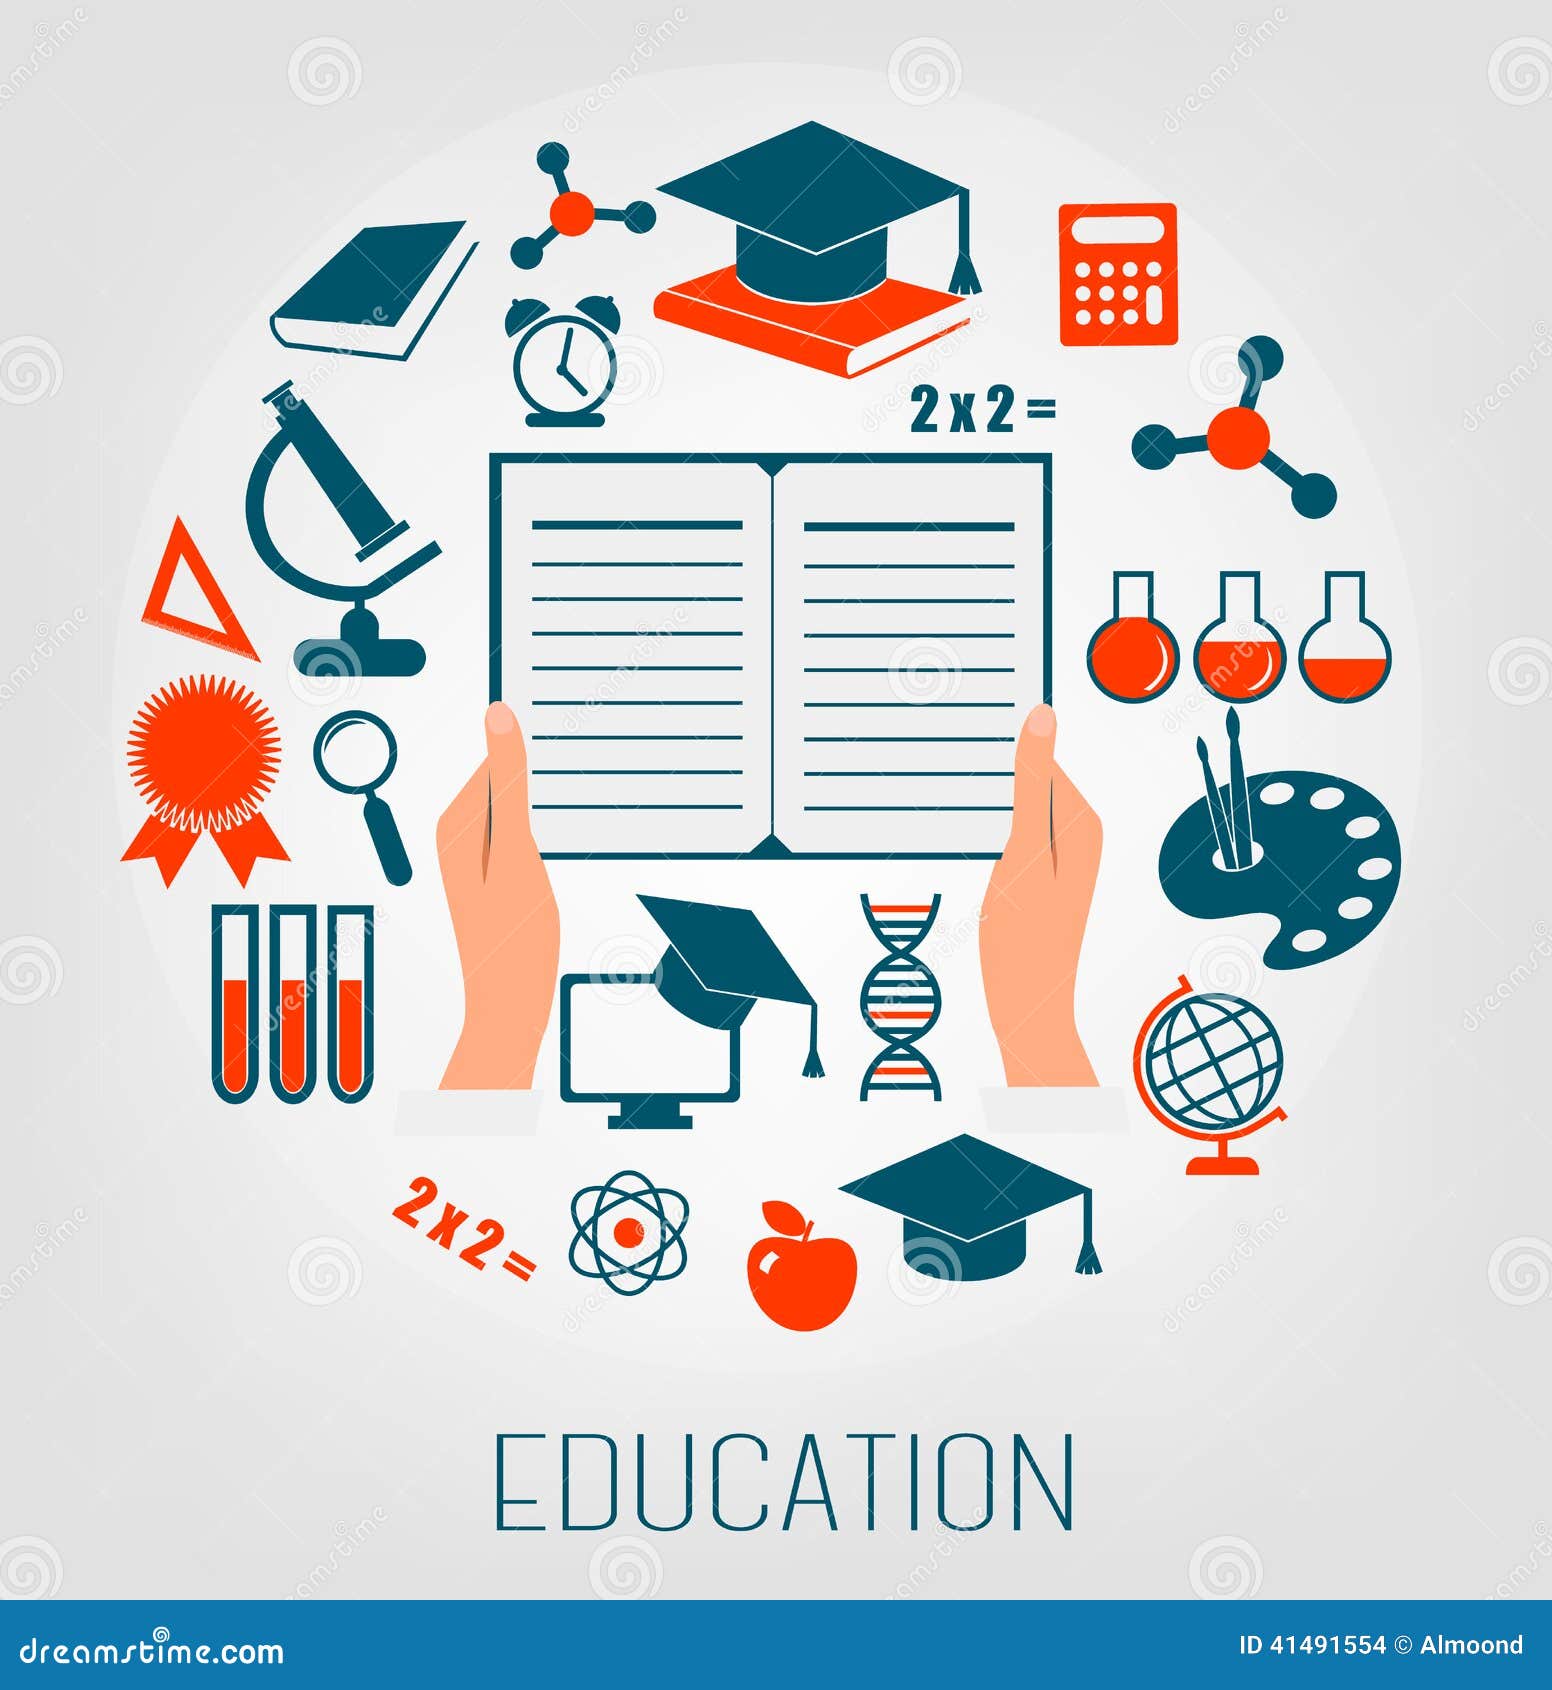 online learning clipart - photo #44